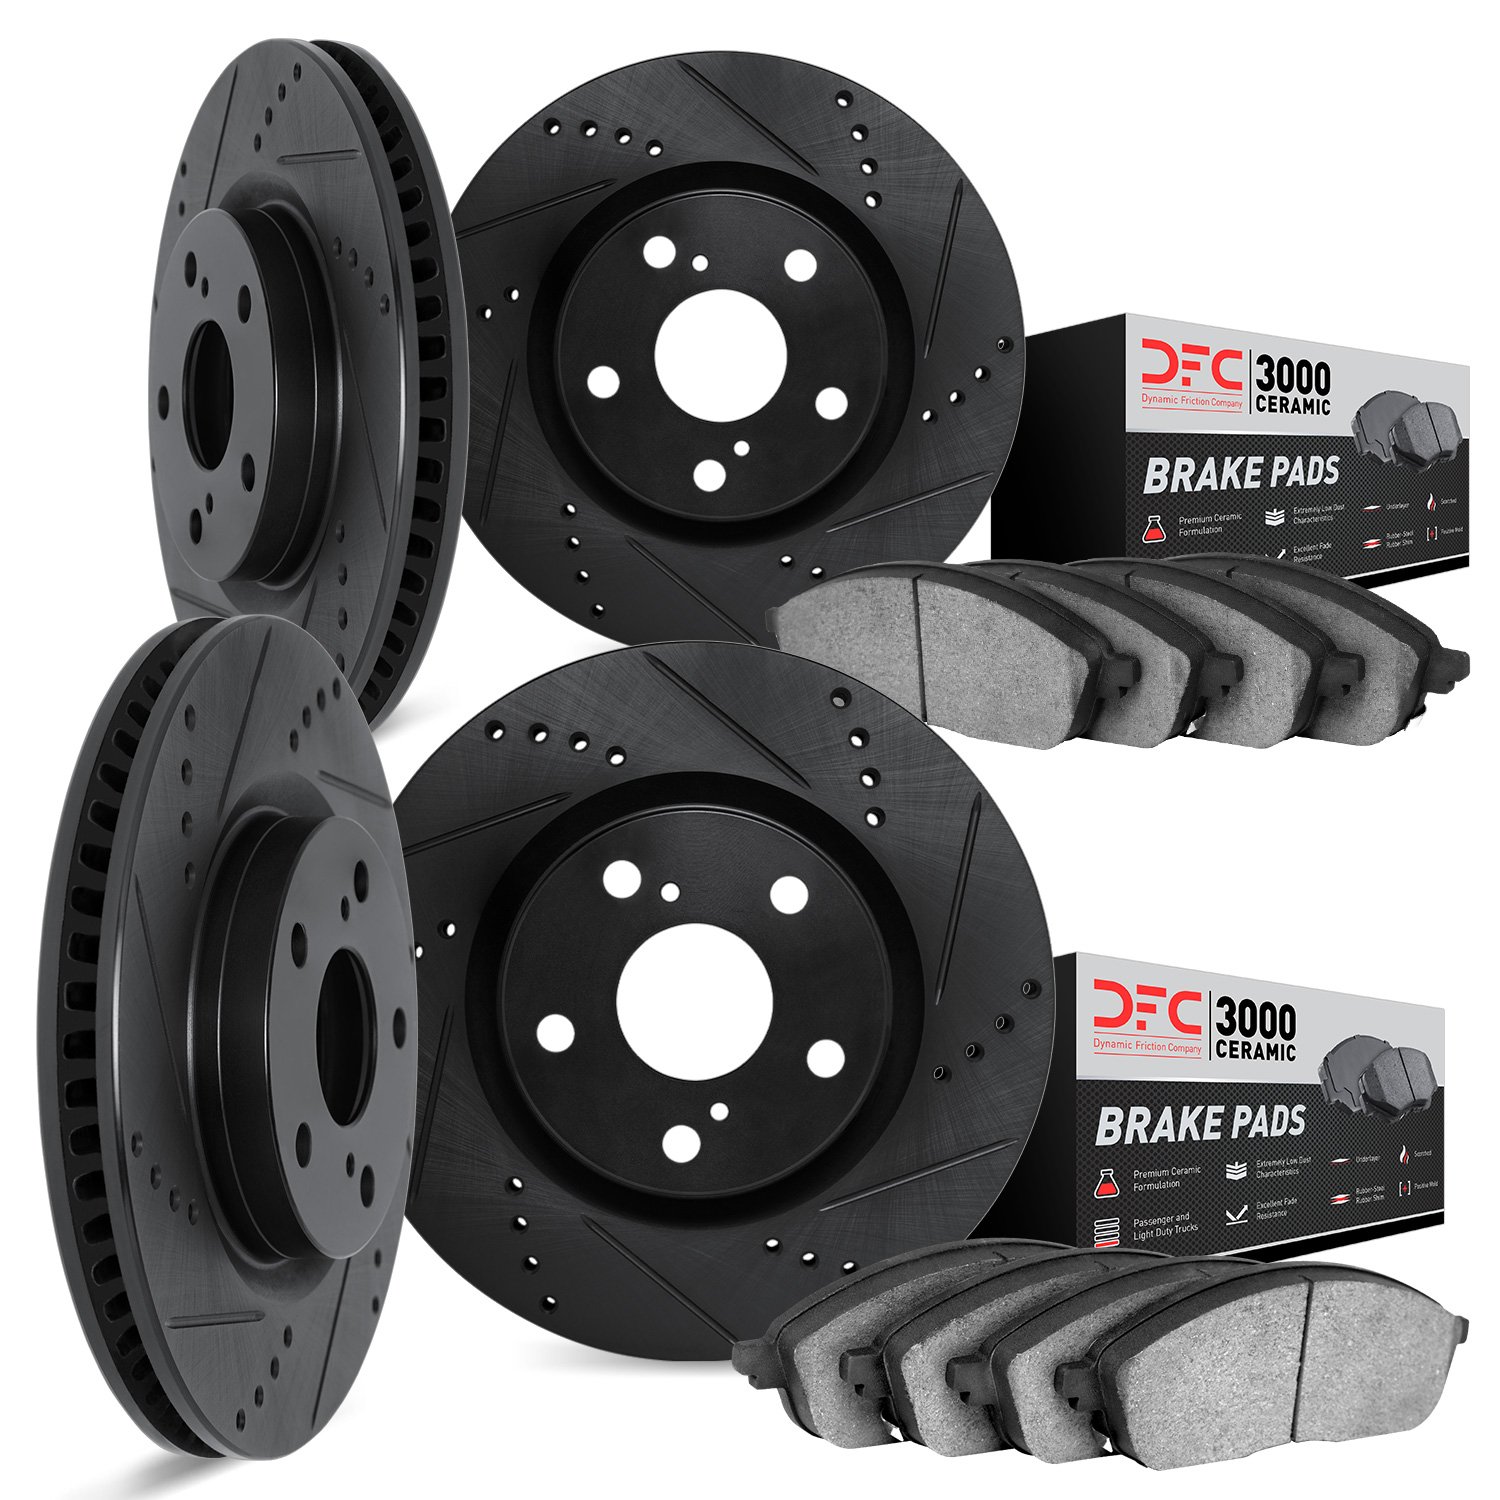 8304-39018 Drilled/Slotted Brake Rotors with 3000-Series Ceramic Brake Pads Kit [Black], Fits Select Mopar, Position: Front and